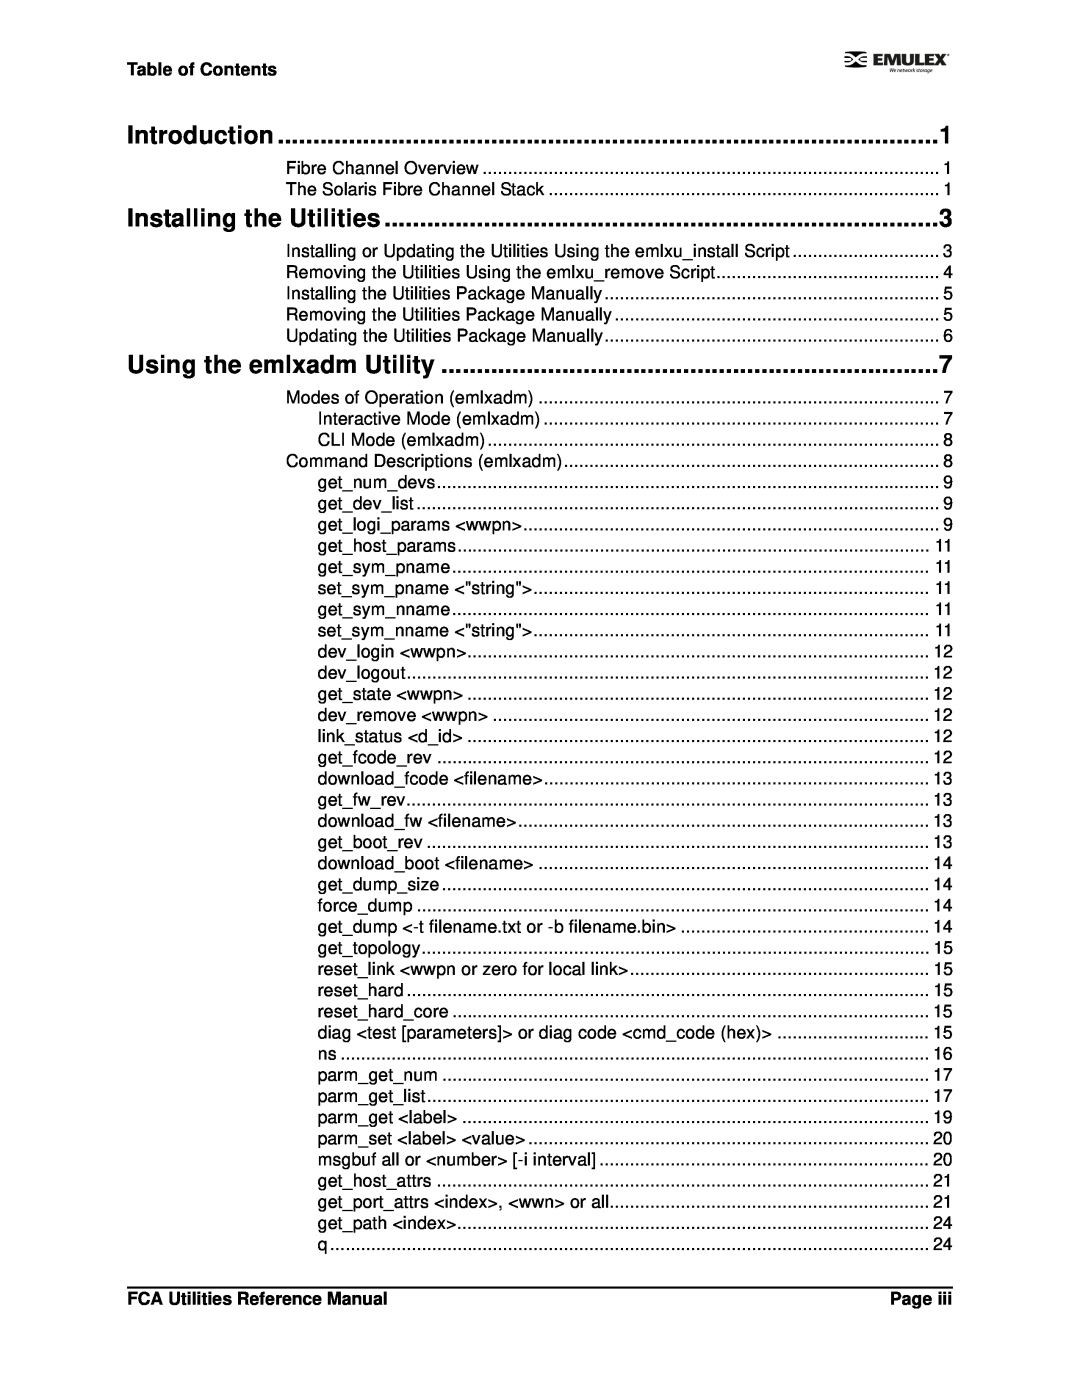 Emulex EMULEX manual Introduction, Installing the Utilities, Using the emlxadm Utility, Table of Contents, Page 